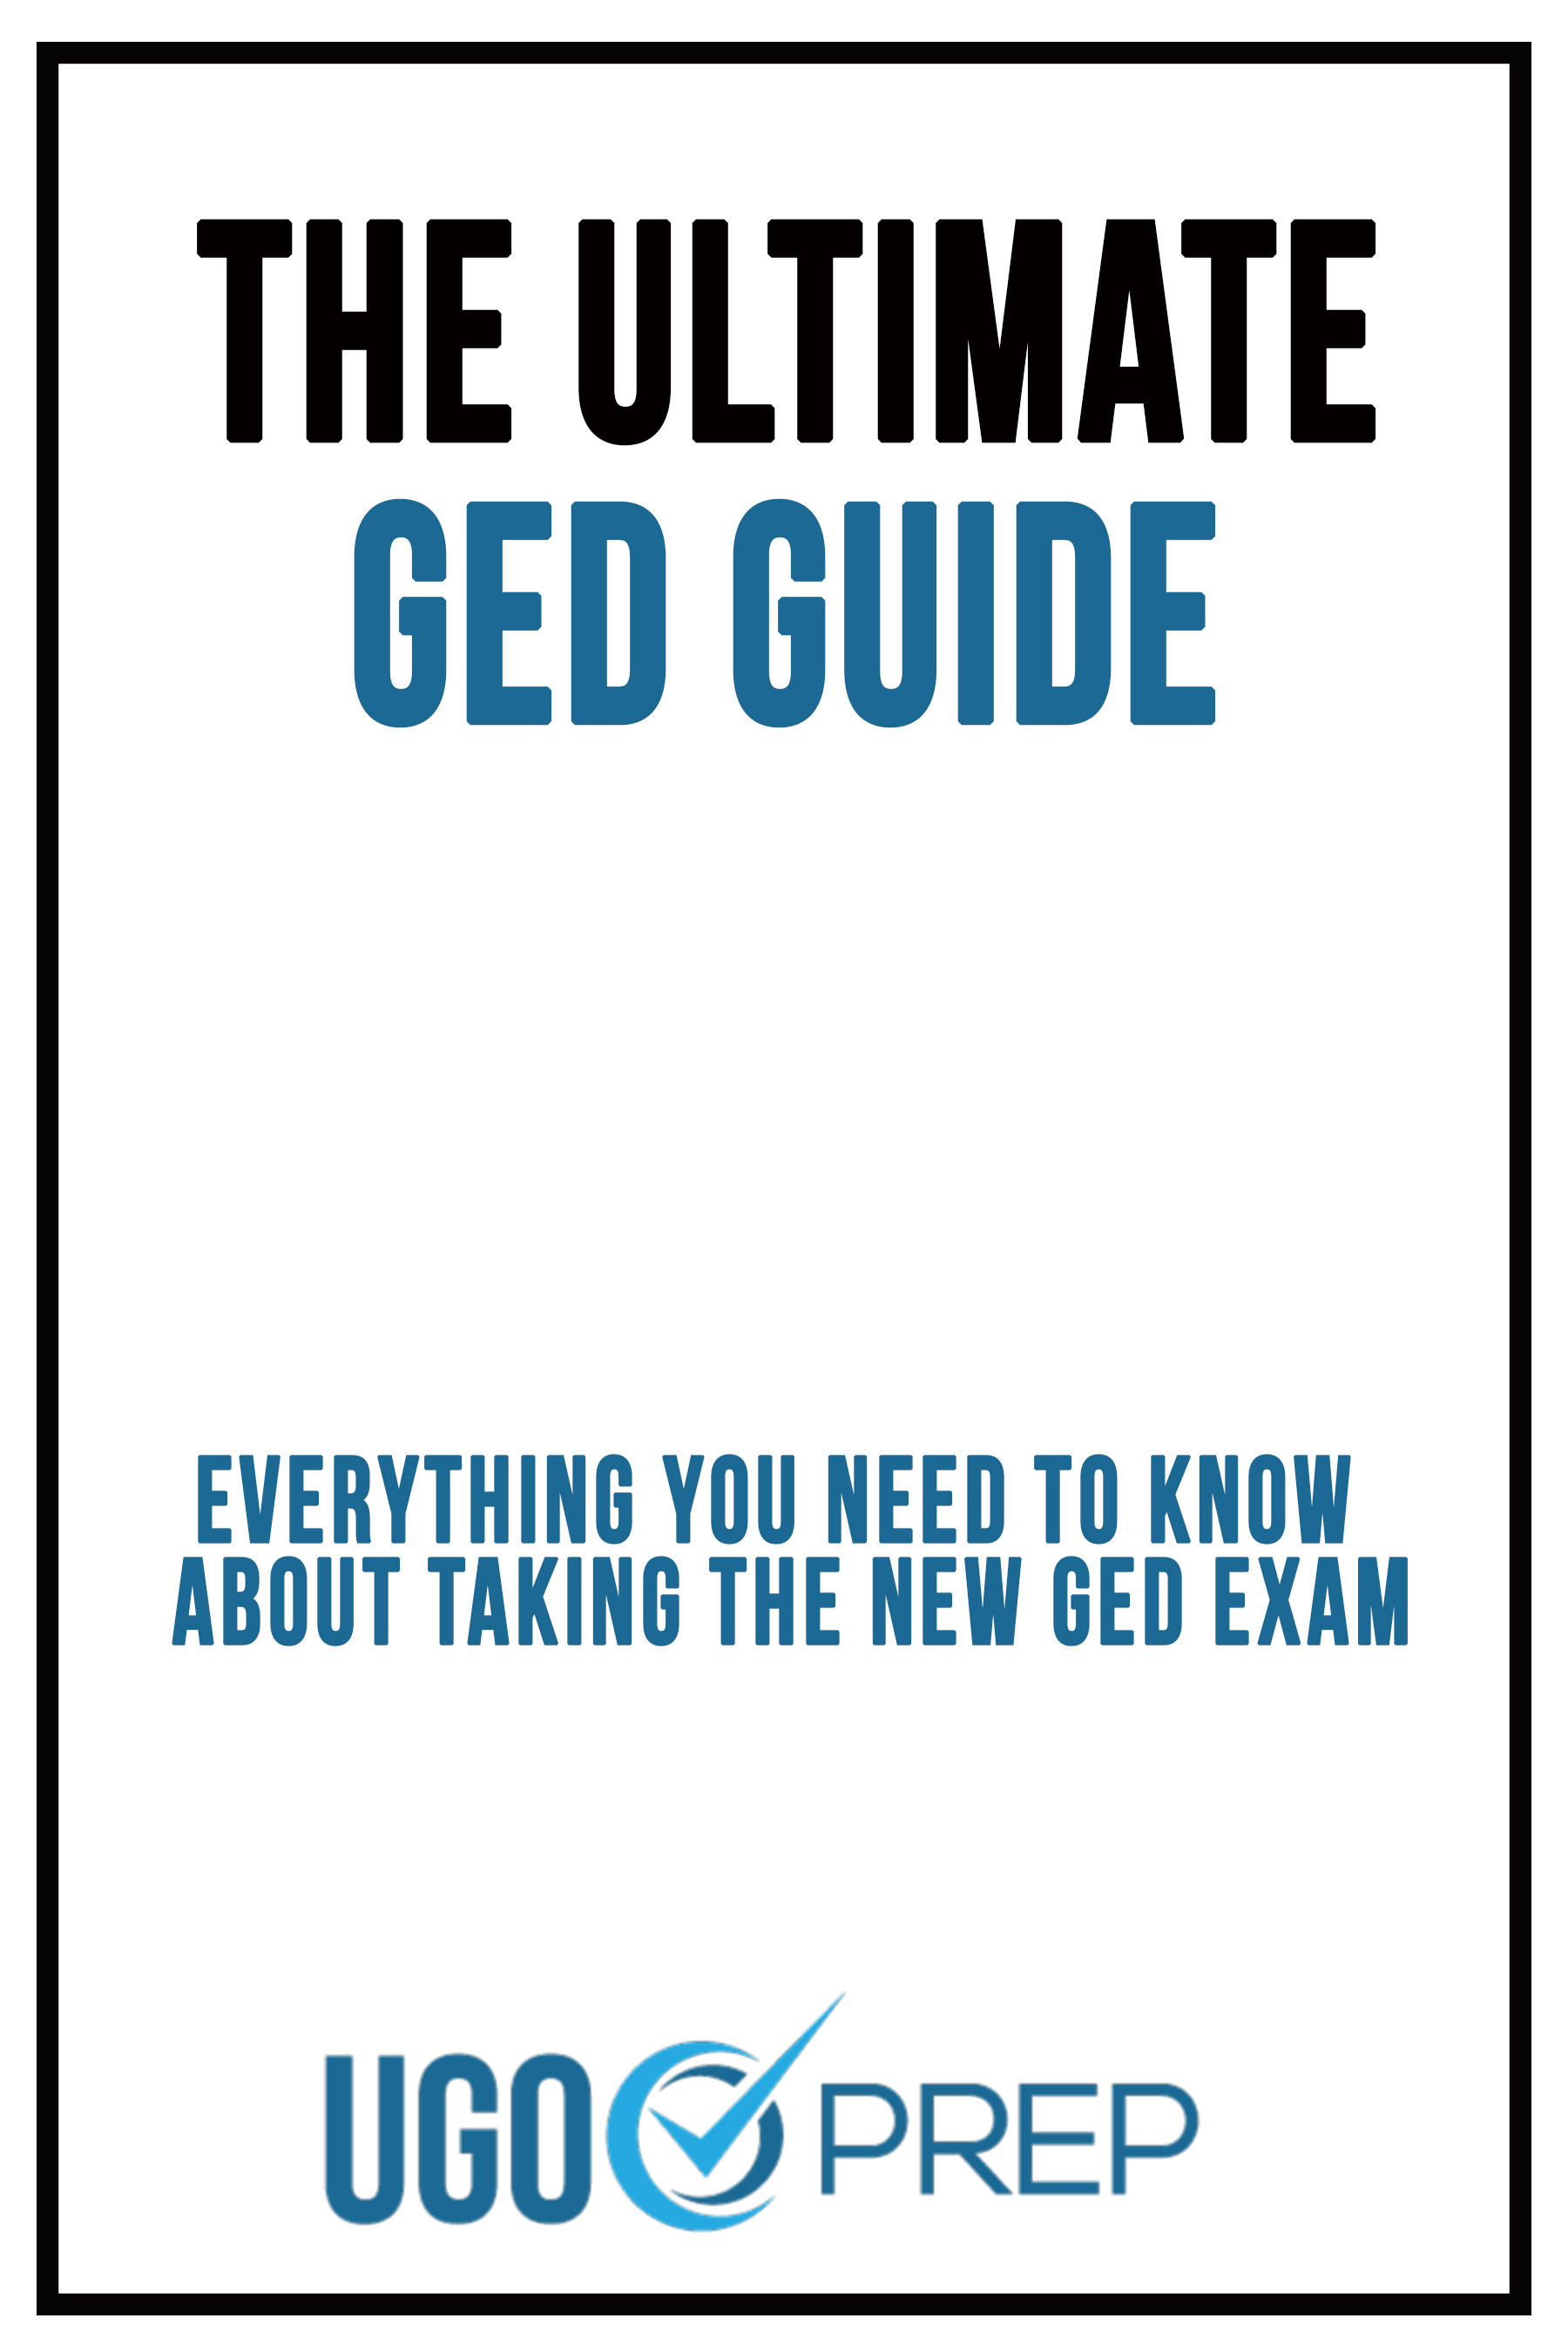 Ged Classes Near Me